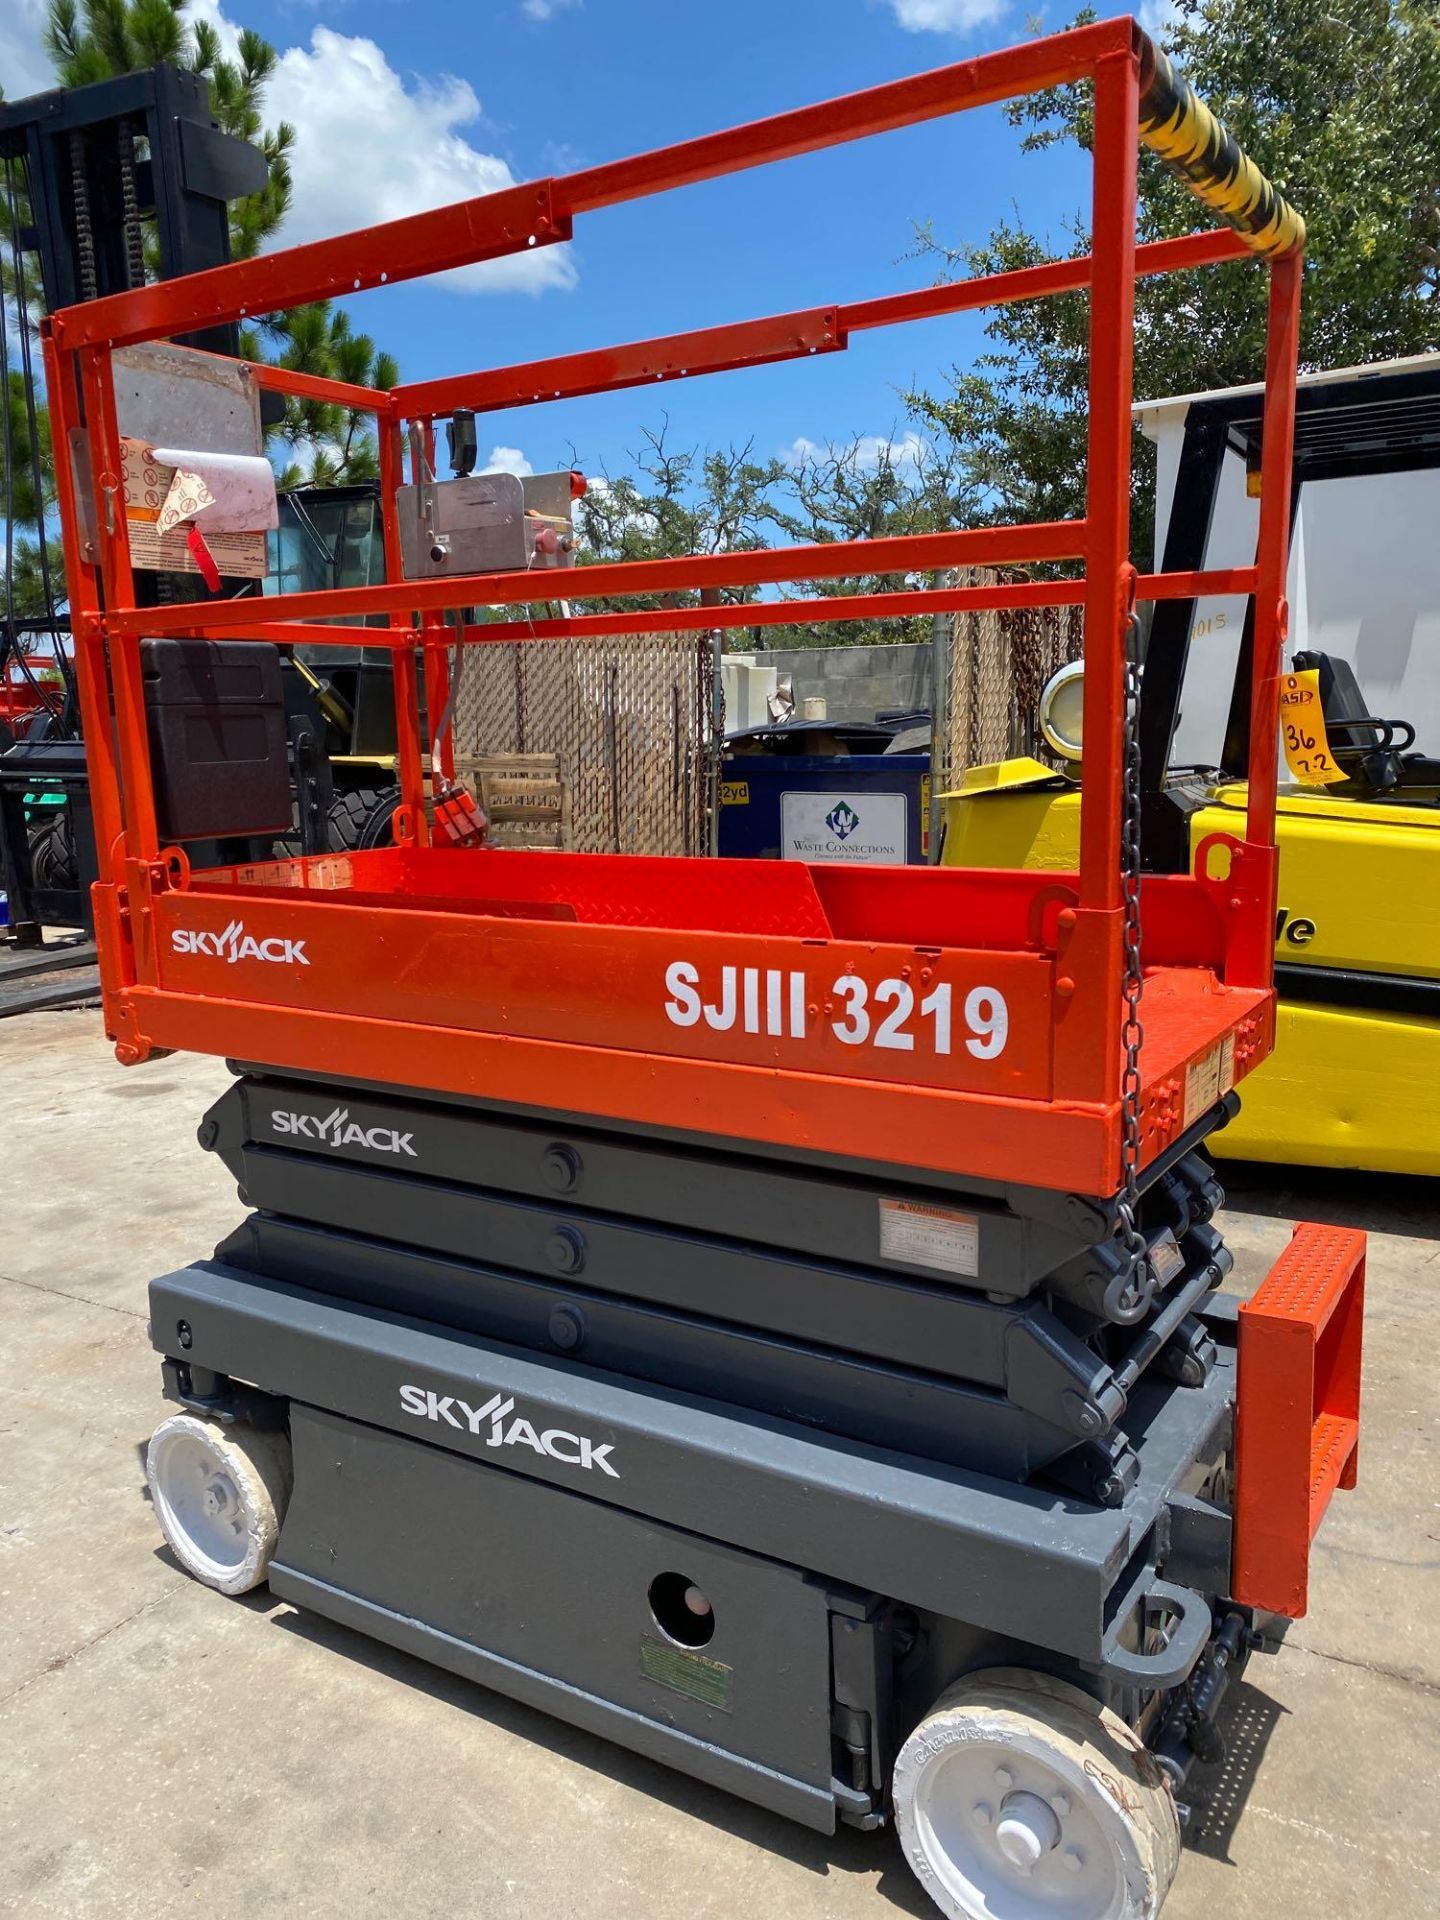 SKYJACK SJIII 3219 SCISSOR LIFT, 312 HOURS SHOWING, 24V, BUILT IN CHARGER, RUNS AND OPERATES